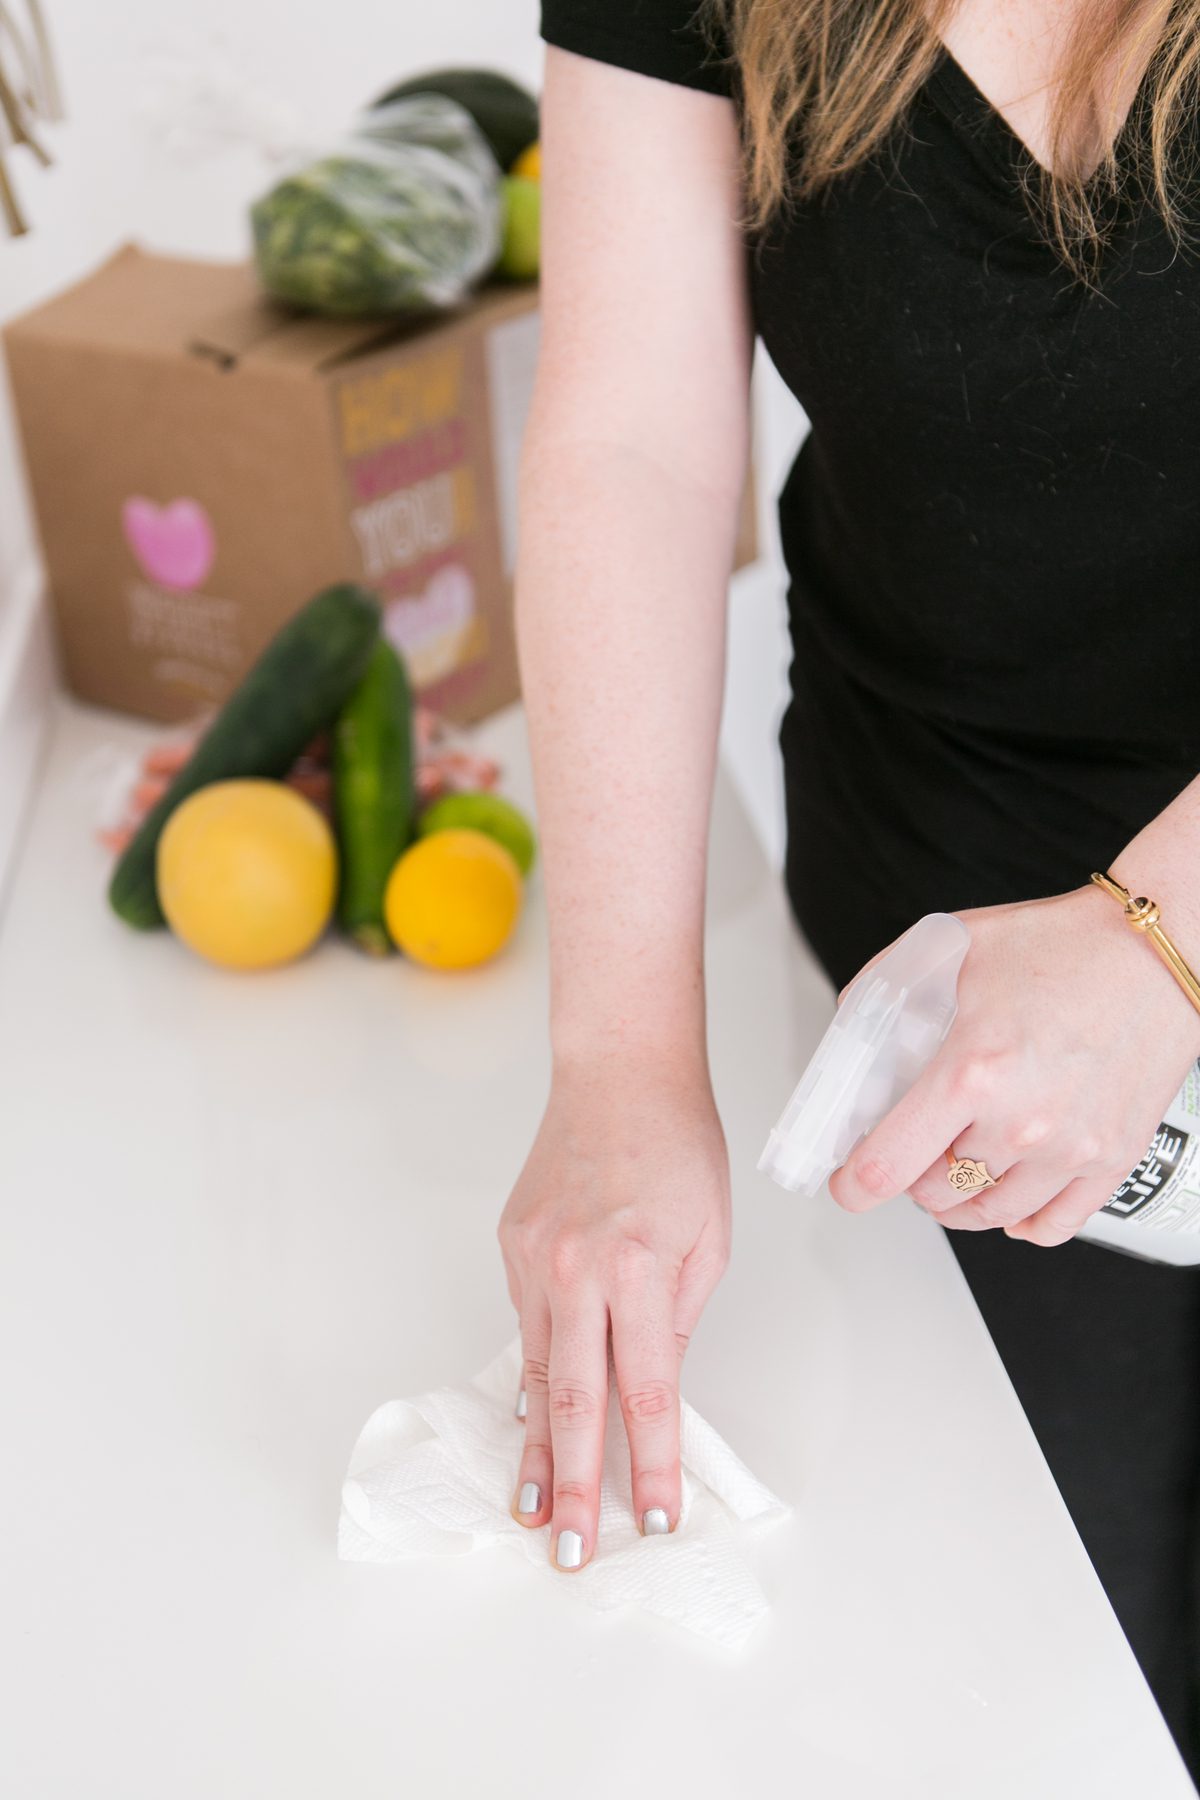 woman help the plant by using Better Life All-Purpose Cleaner